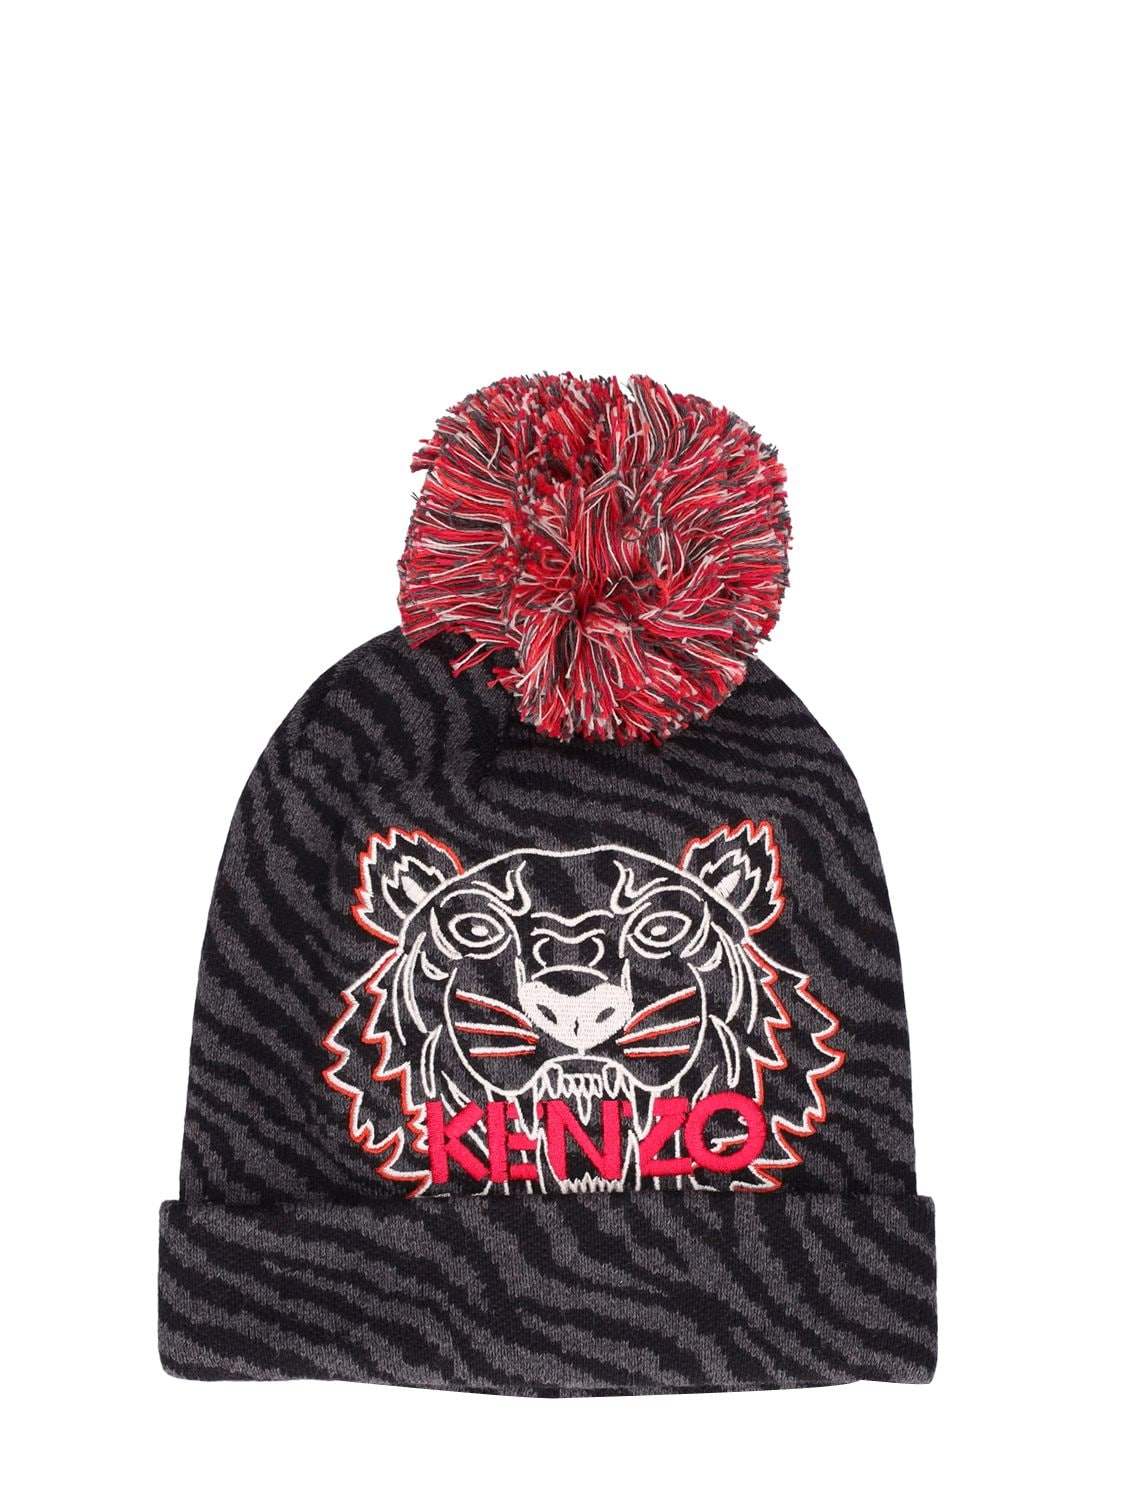 KENZO EMBROIDERED COTTON BLEND KNIT BEANIE